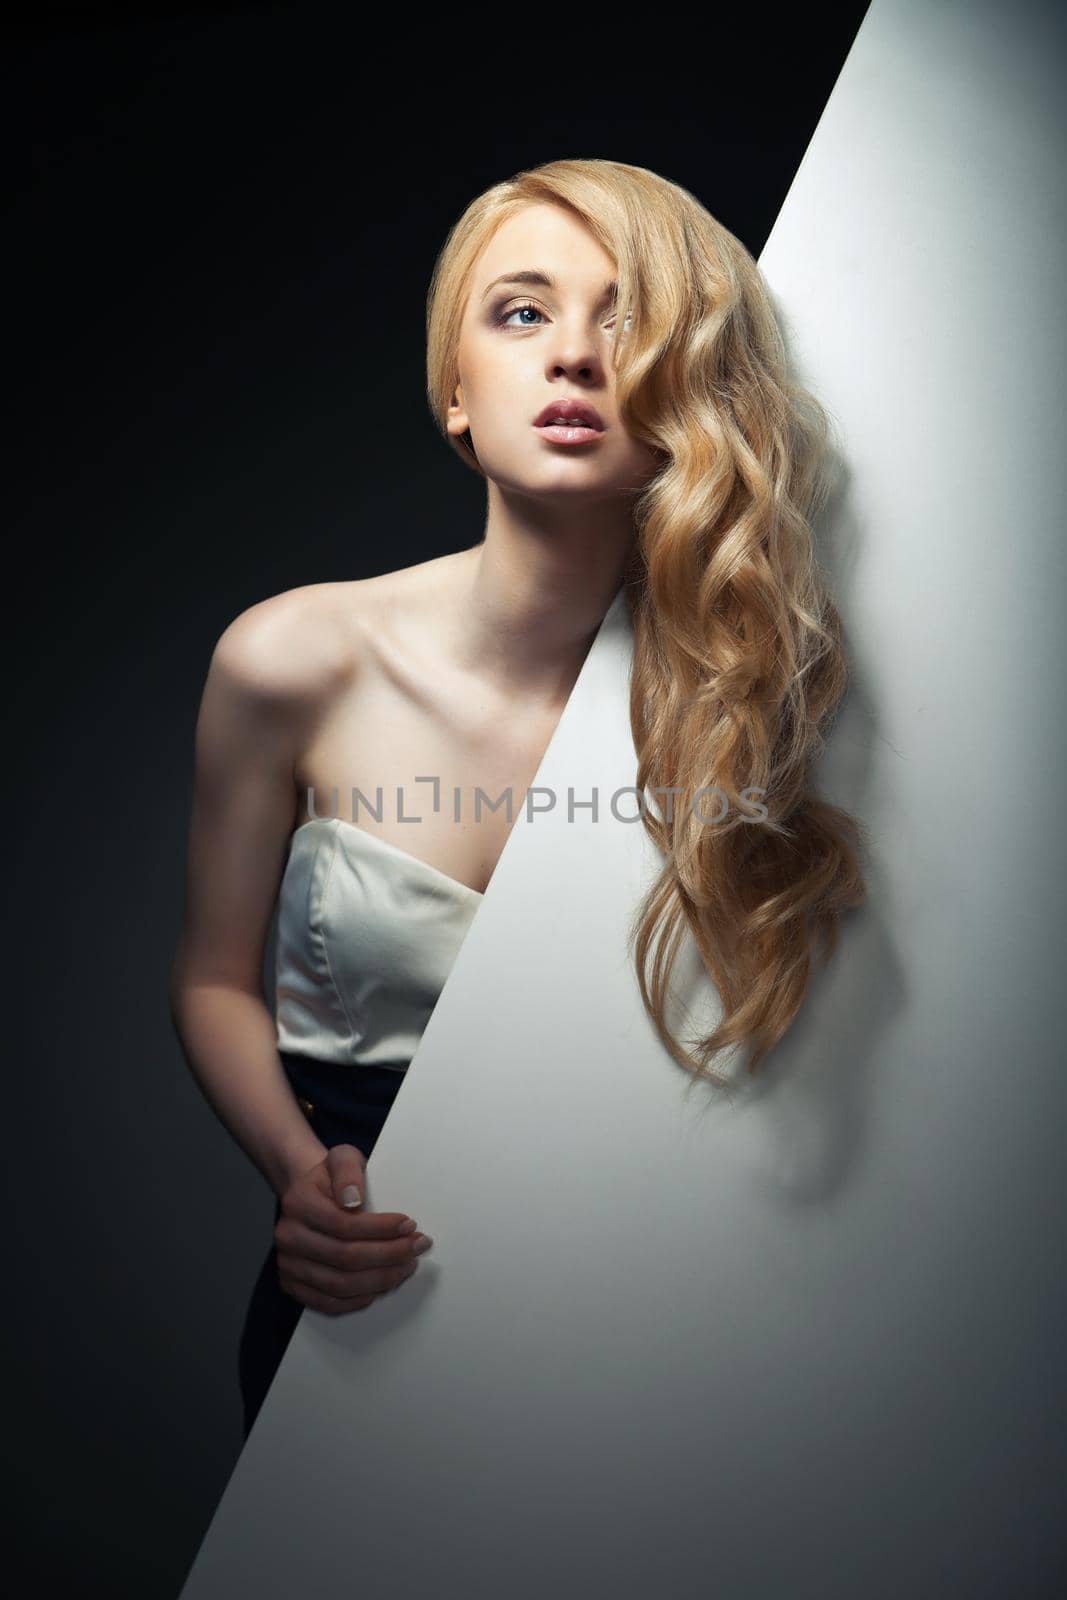 pretty blond model hiding behind a big blank sheet of paper and looking aside.